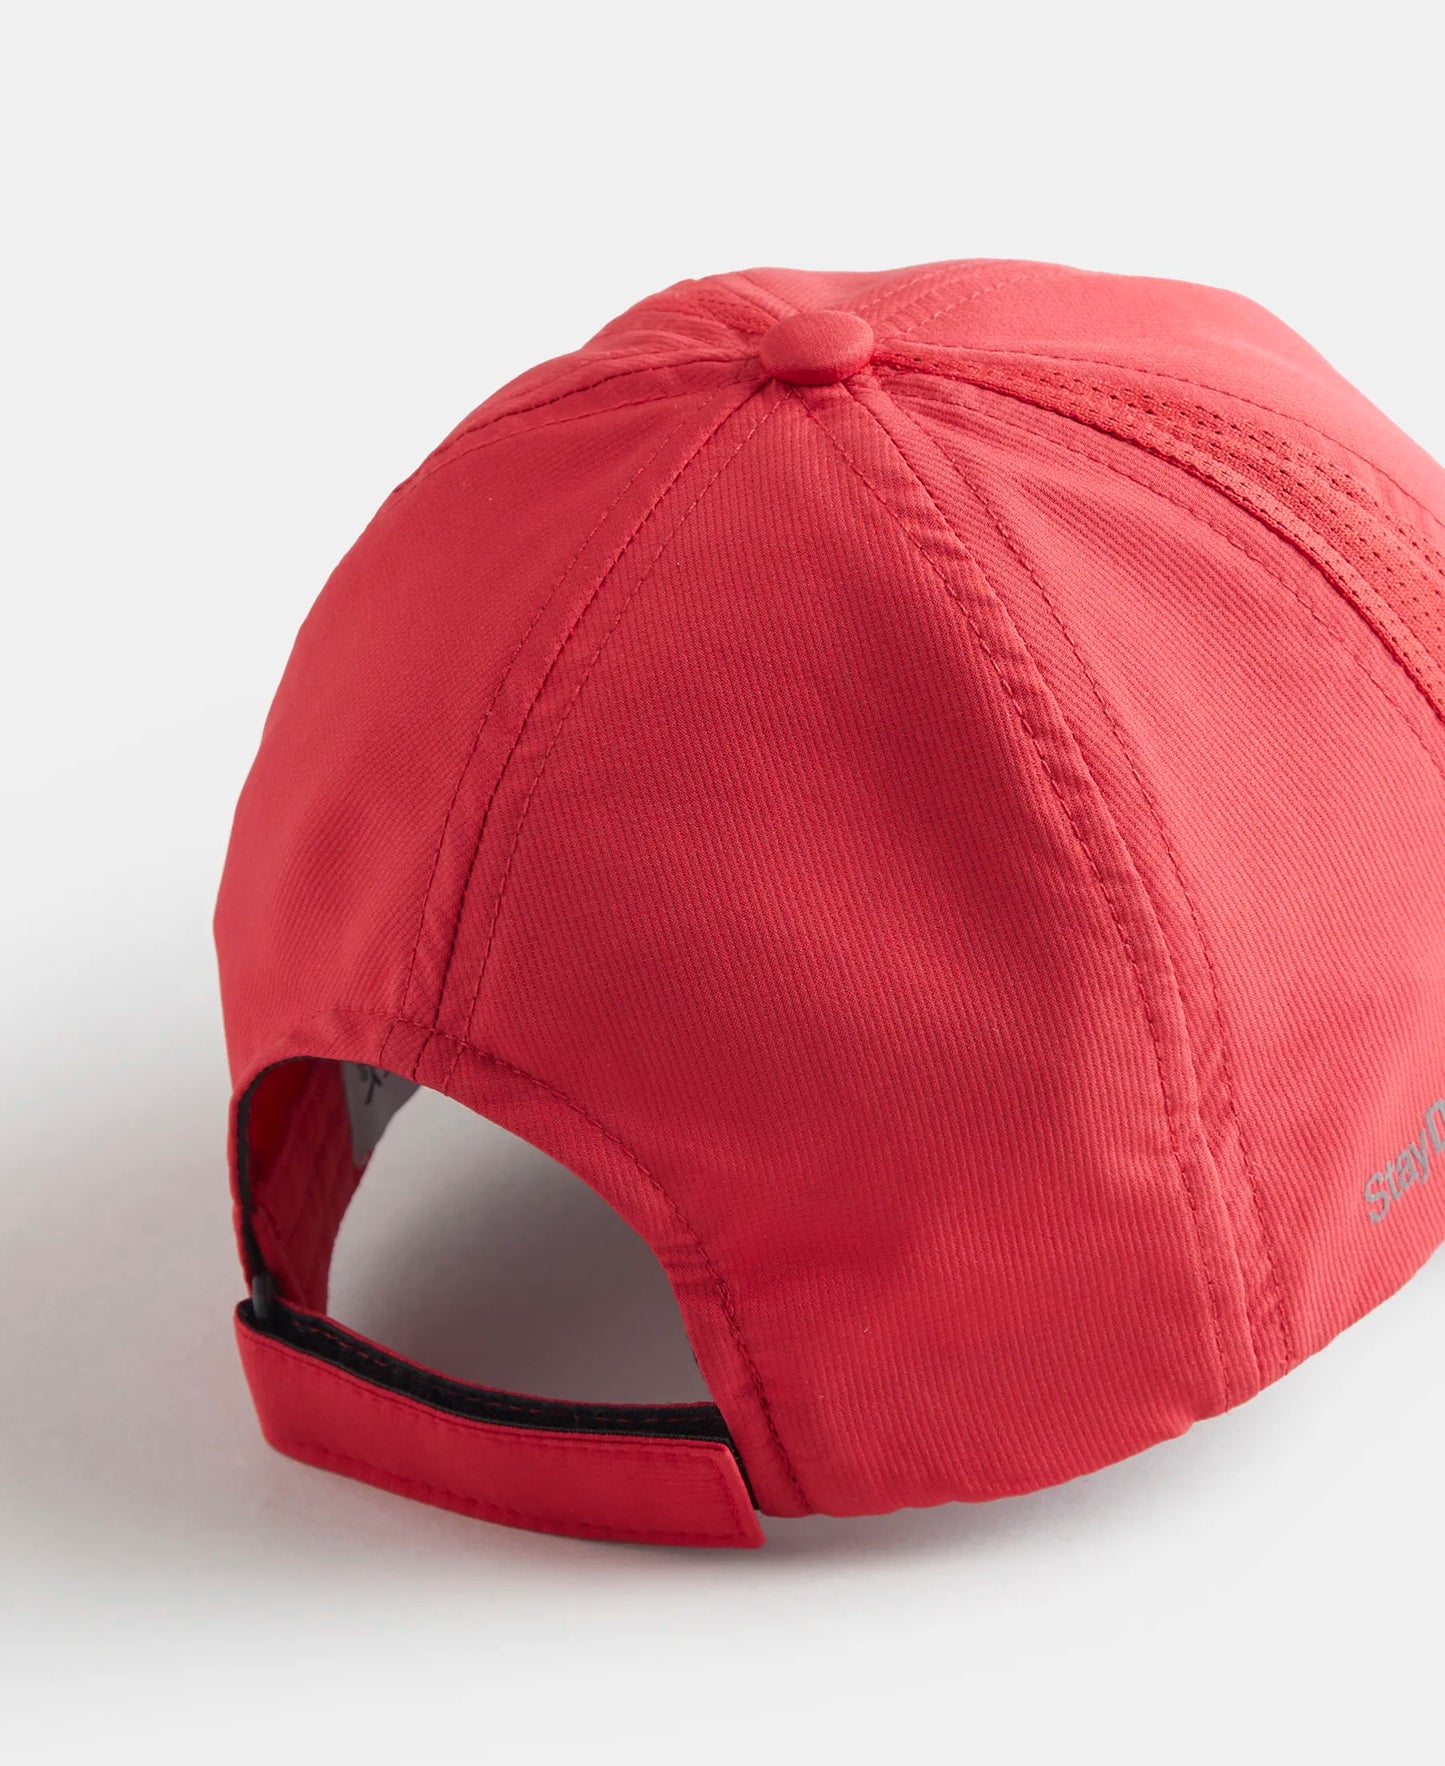 Polyester Solid Cap with Adjustable Back Closure and StayDry Technology - Bright Red-3